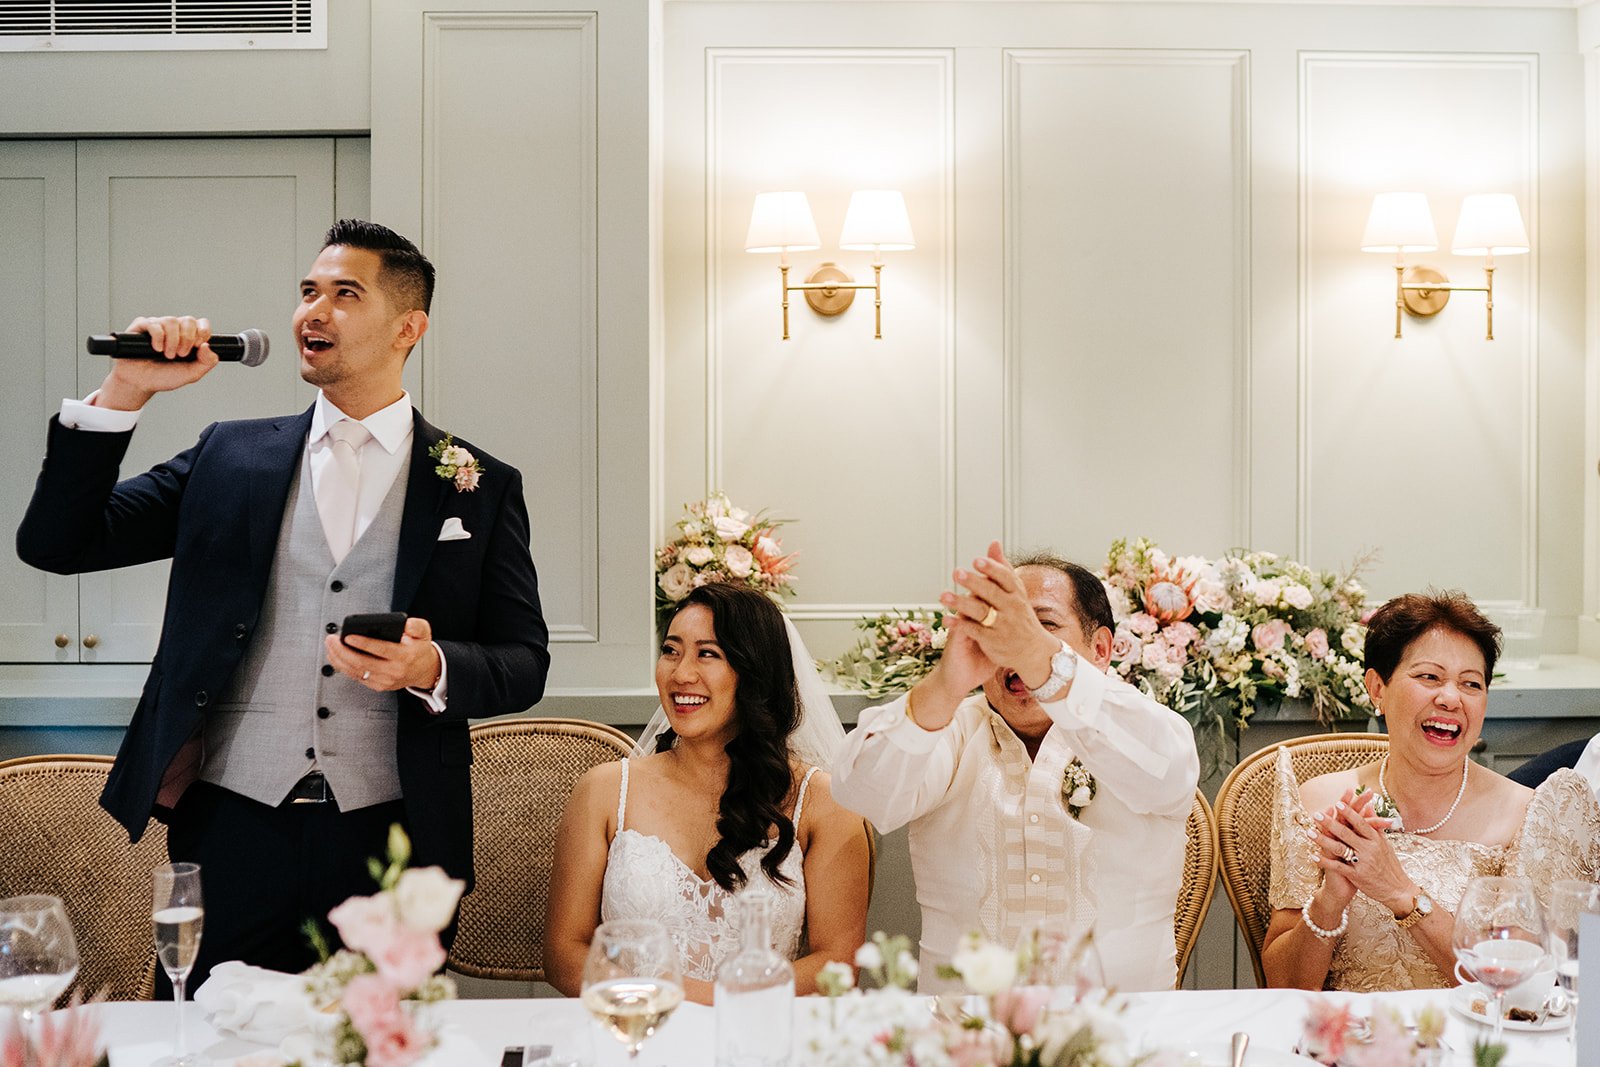 Groom continues delivering wedding speech to everyone's enjoyment while father of the bride claps and cheers